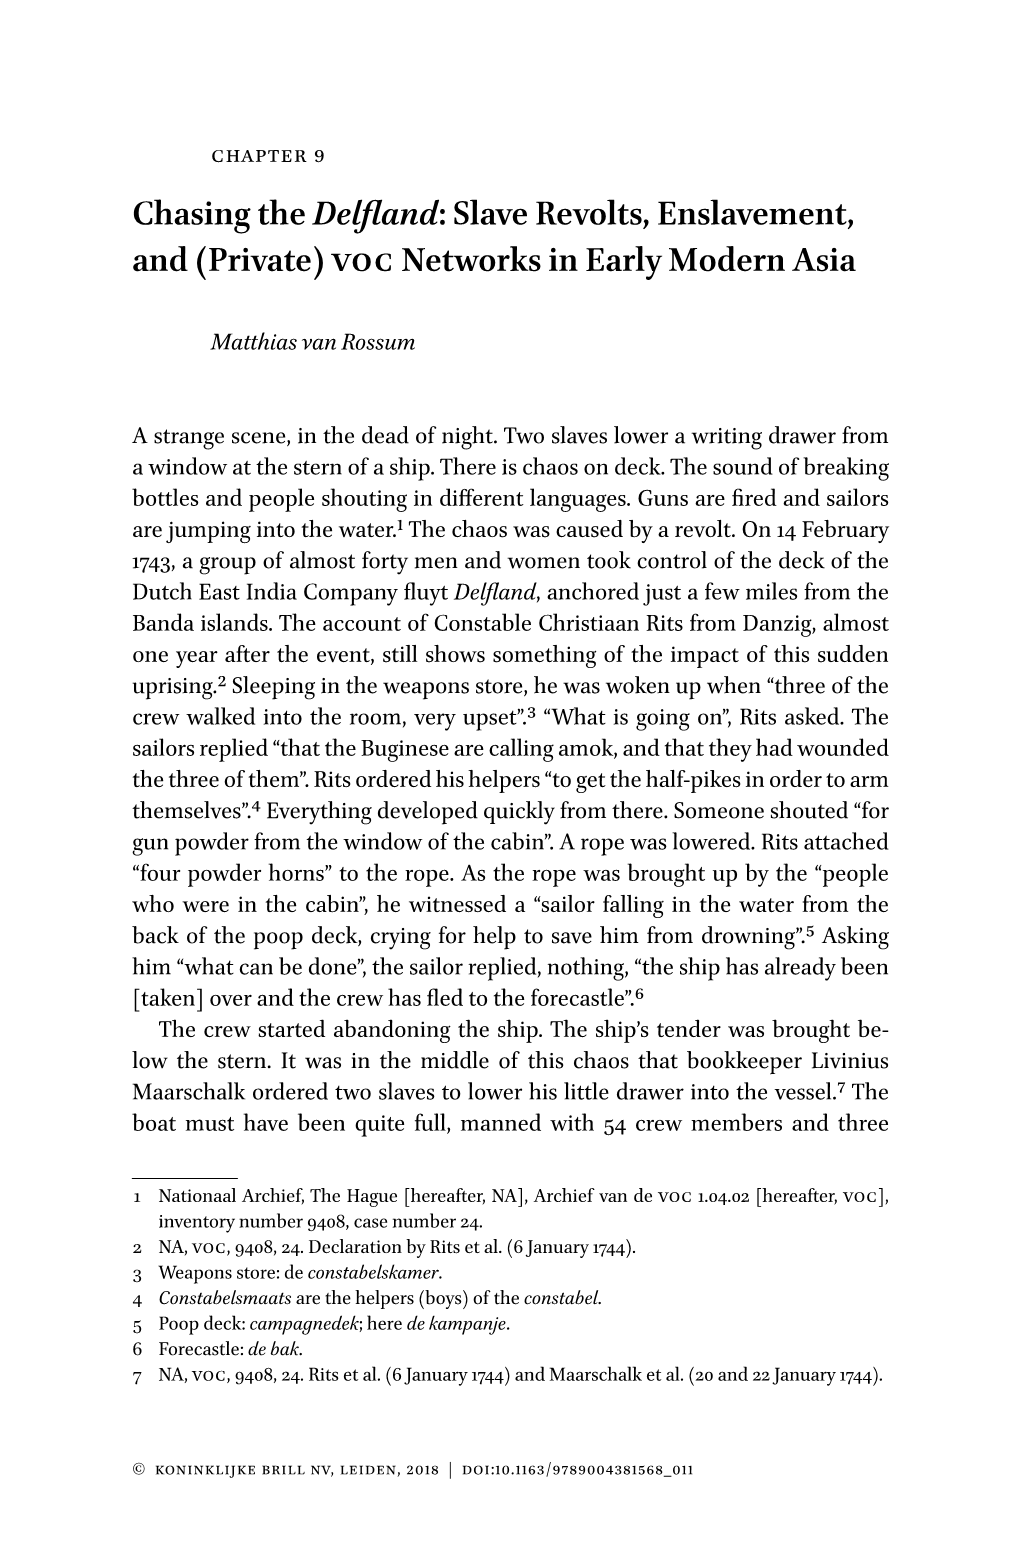 Slave Revolts, Enslavement, and (Private) Voc Networks in Early Modern Asia